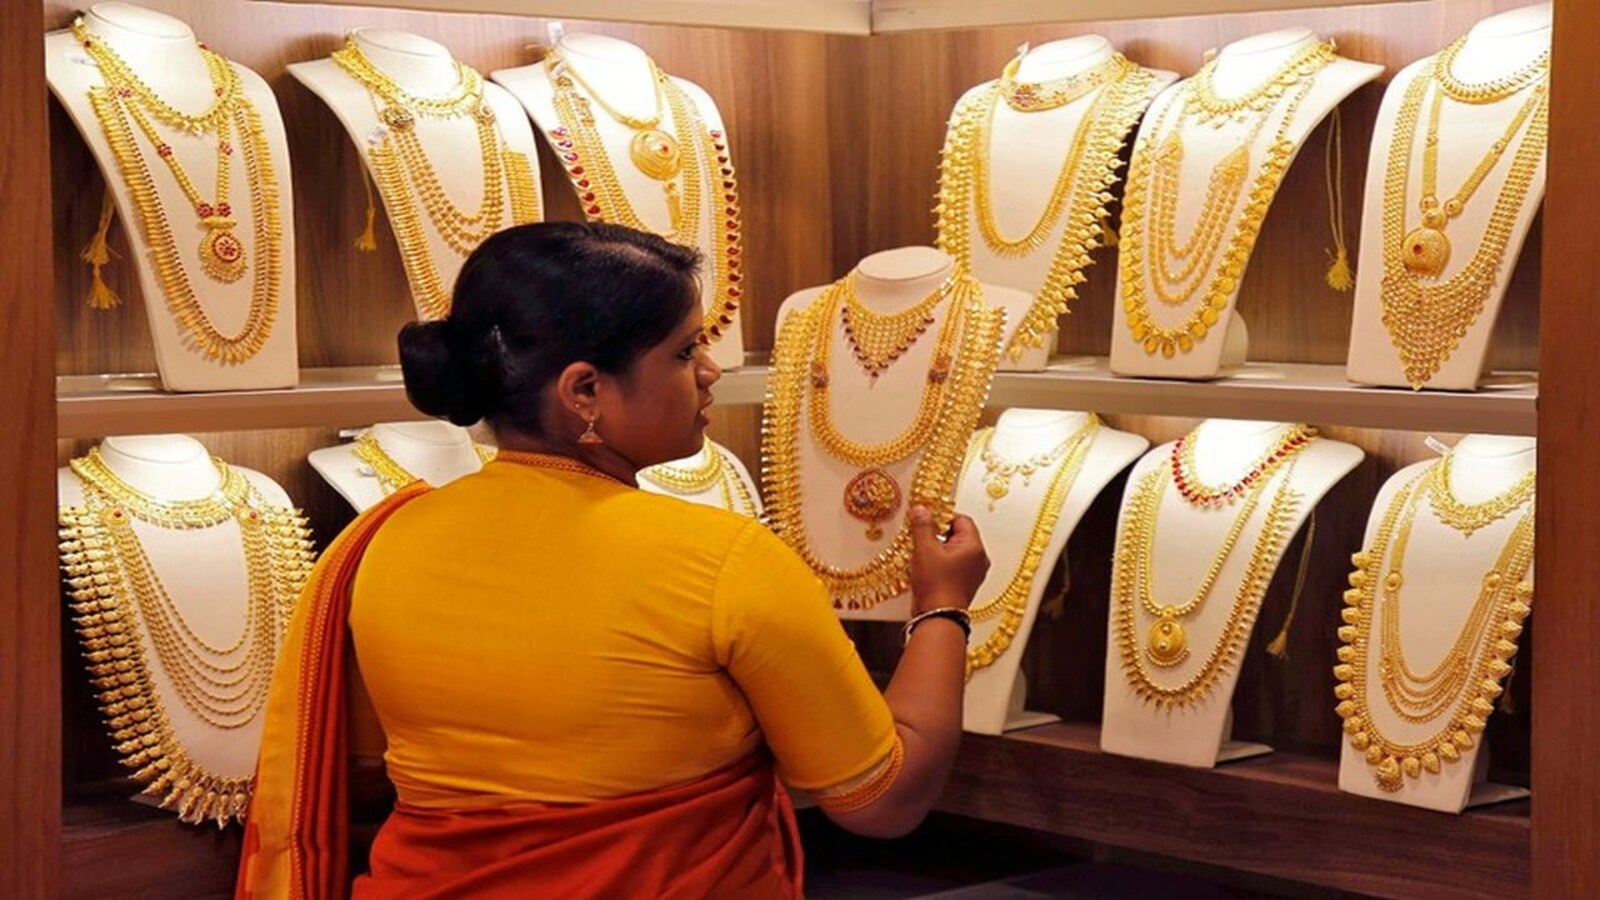 Gold price decreases for 22 and 24 carat in India